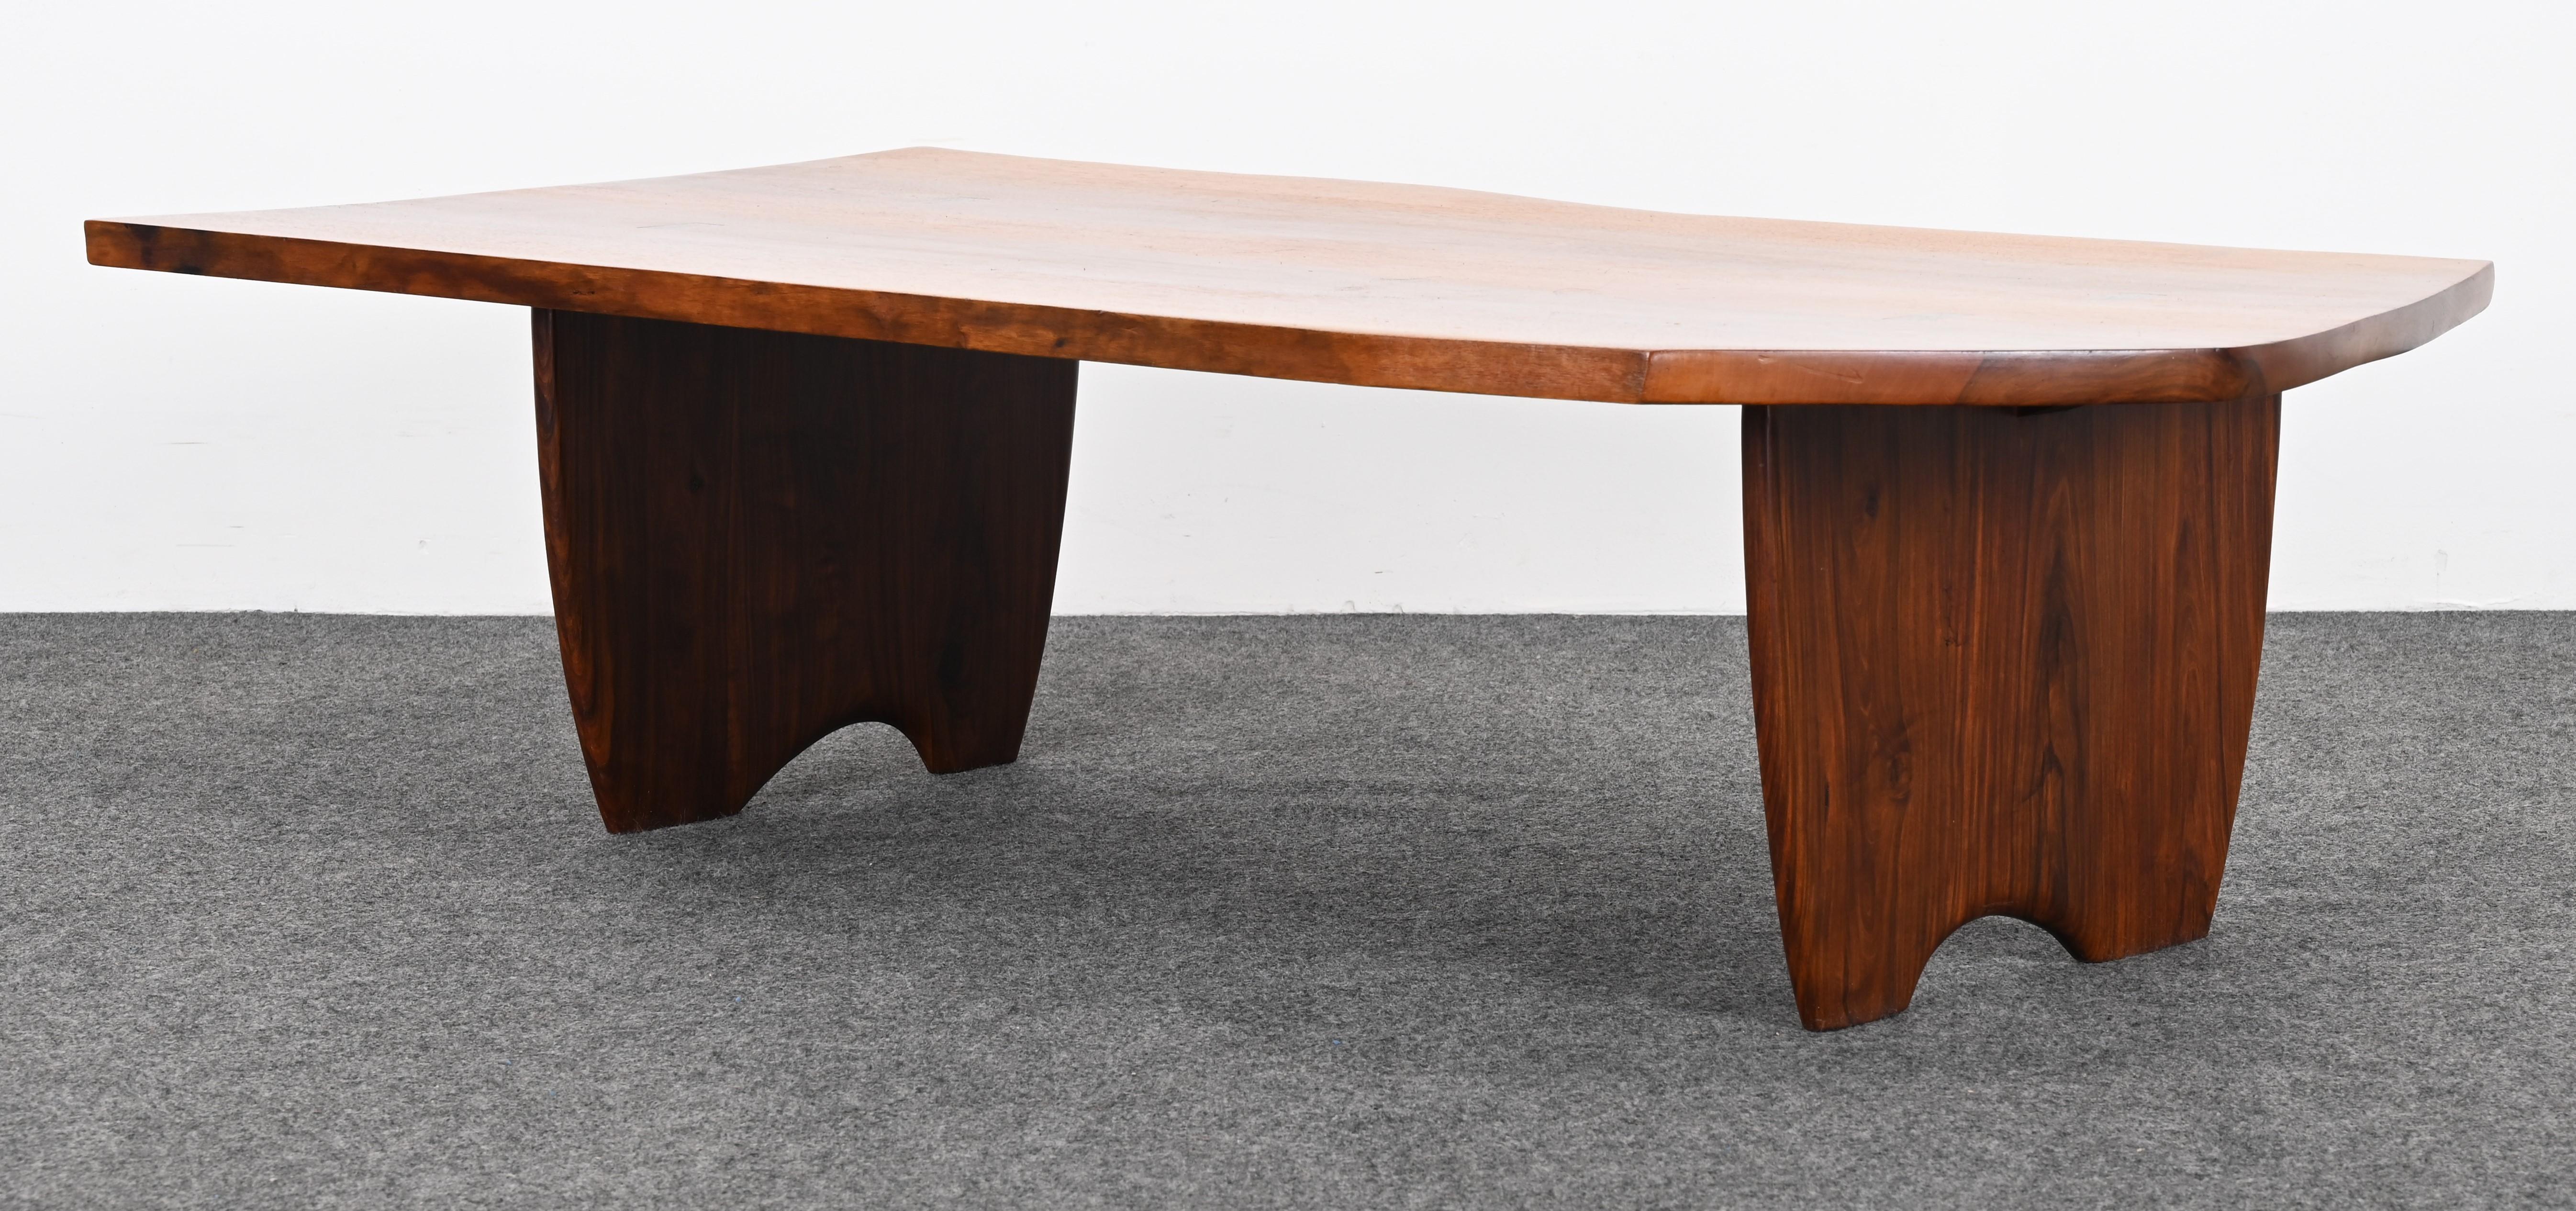 Live Edge Solid Walnut and Rosewood Coffee Table by Richard Rothbard, 1968 In Good Condition For Sale In Hamburg, PA